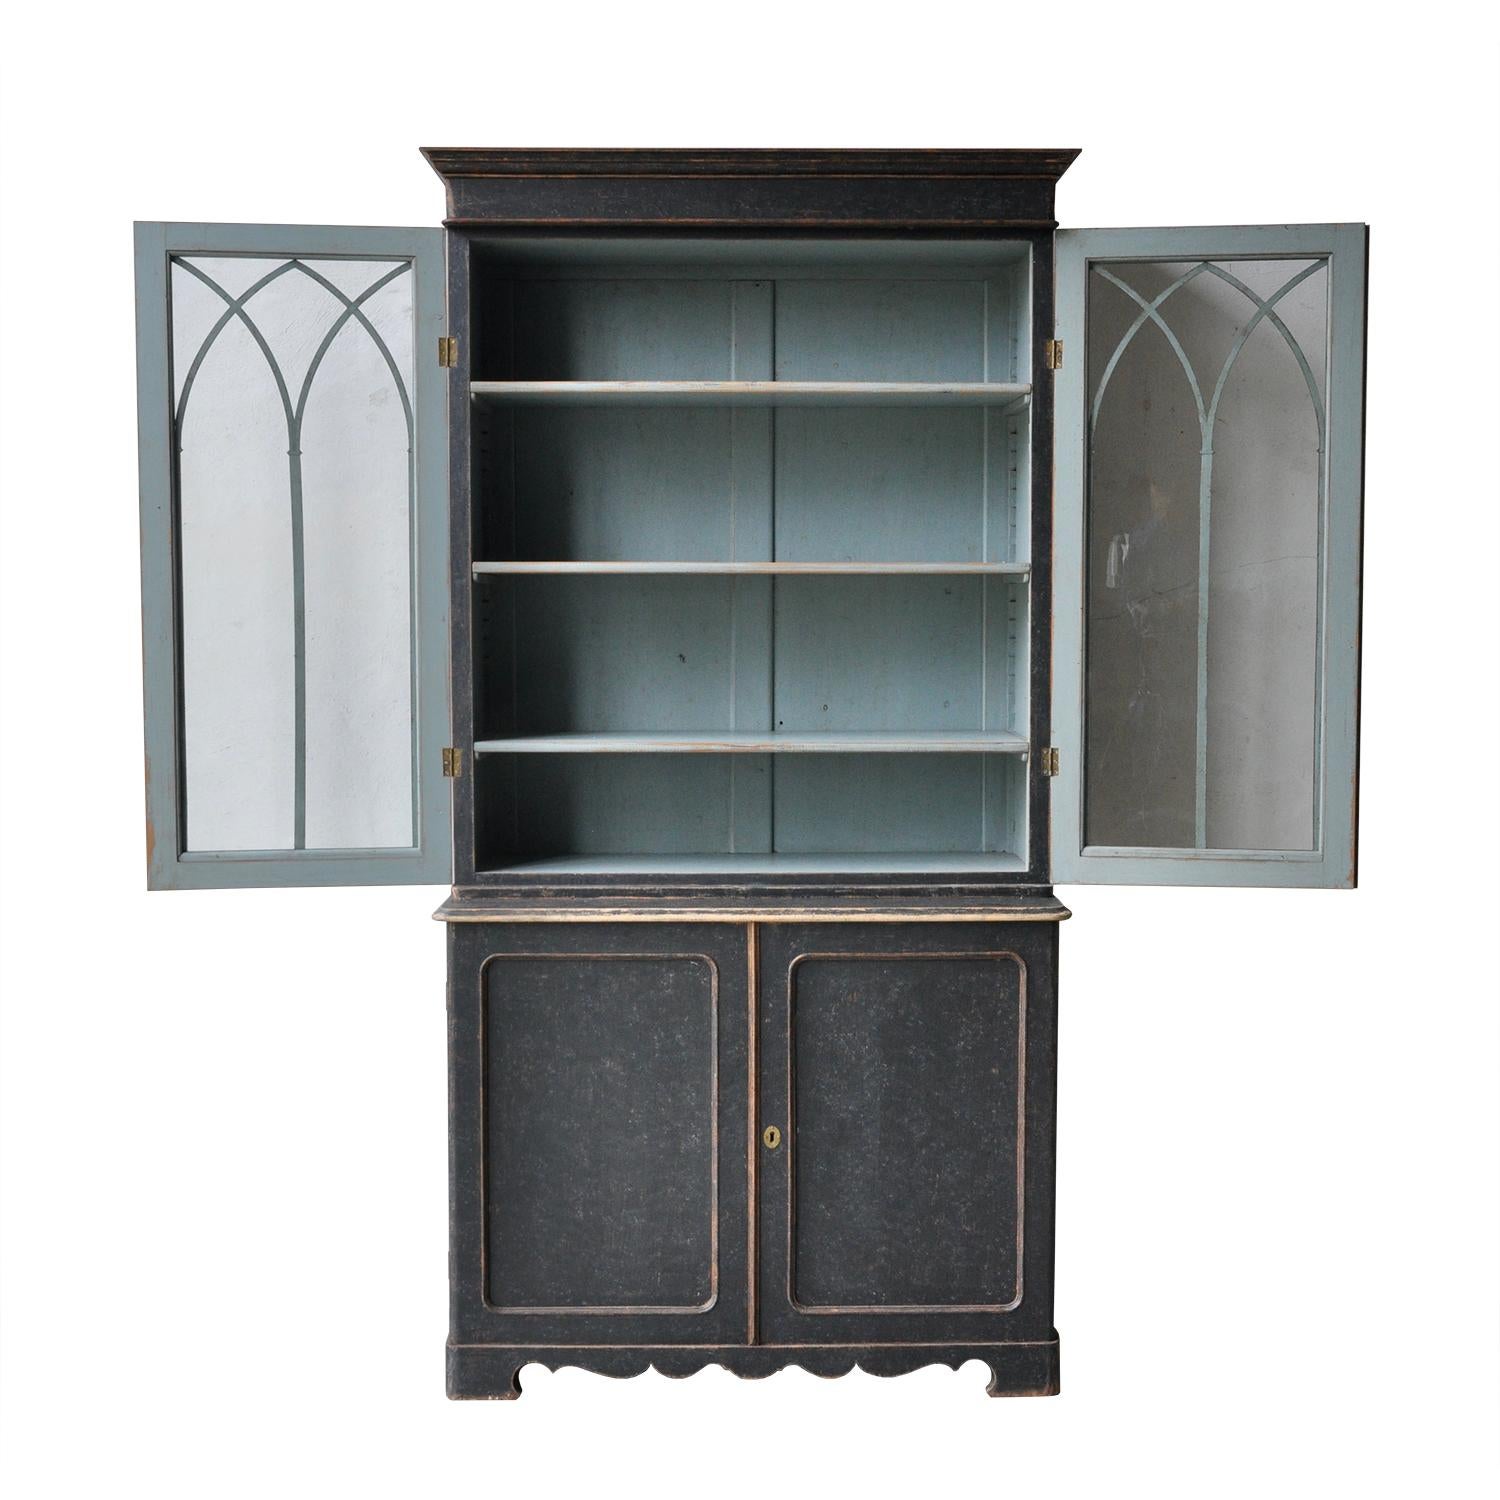 Swedish 19th century bookcase with two glazed doors and gothic detailing, opening to four bookshelves. Below, two further doors open to more storage. This piece has been repainted in black, with a blue interior. The shelves are adjustable in both